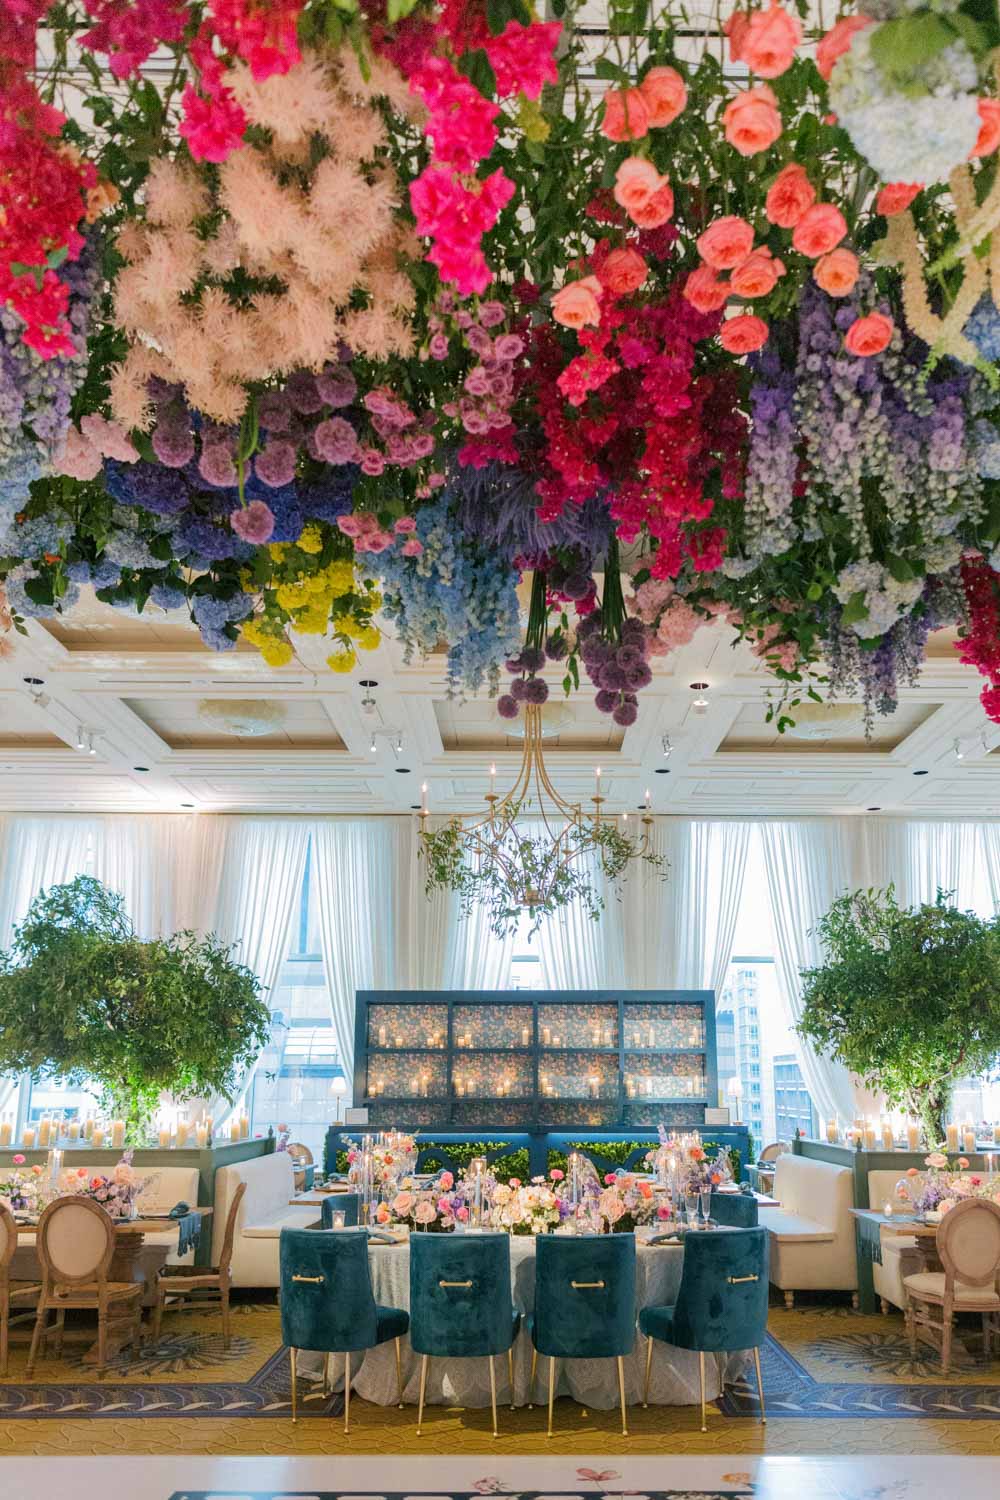 Colorful wedding flowers drape from the ceiling of The Peninsula hotel in Chicago.